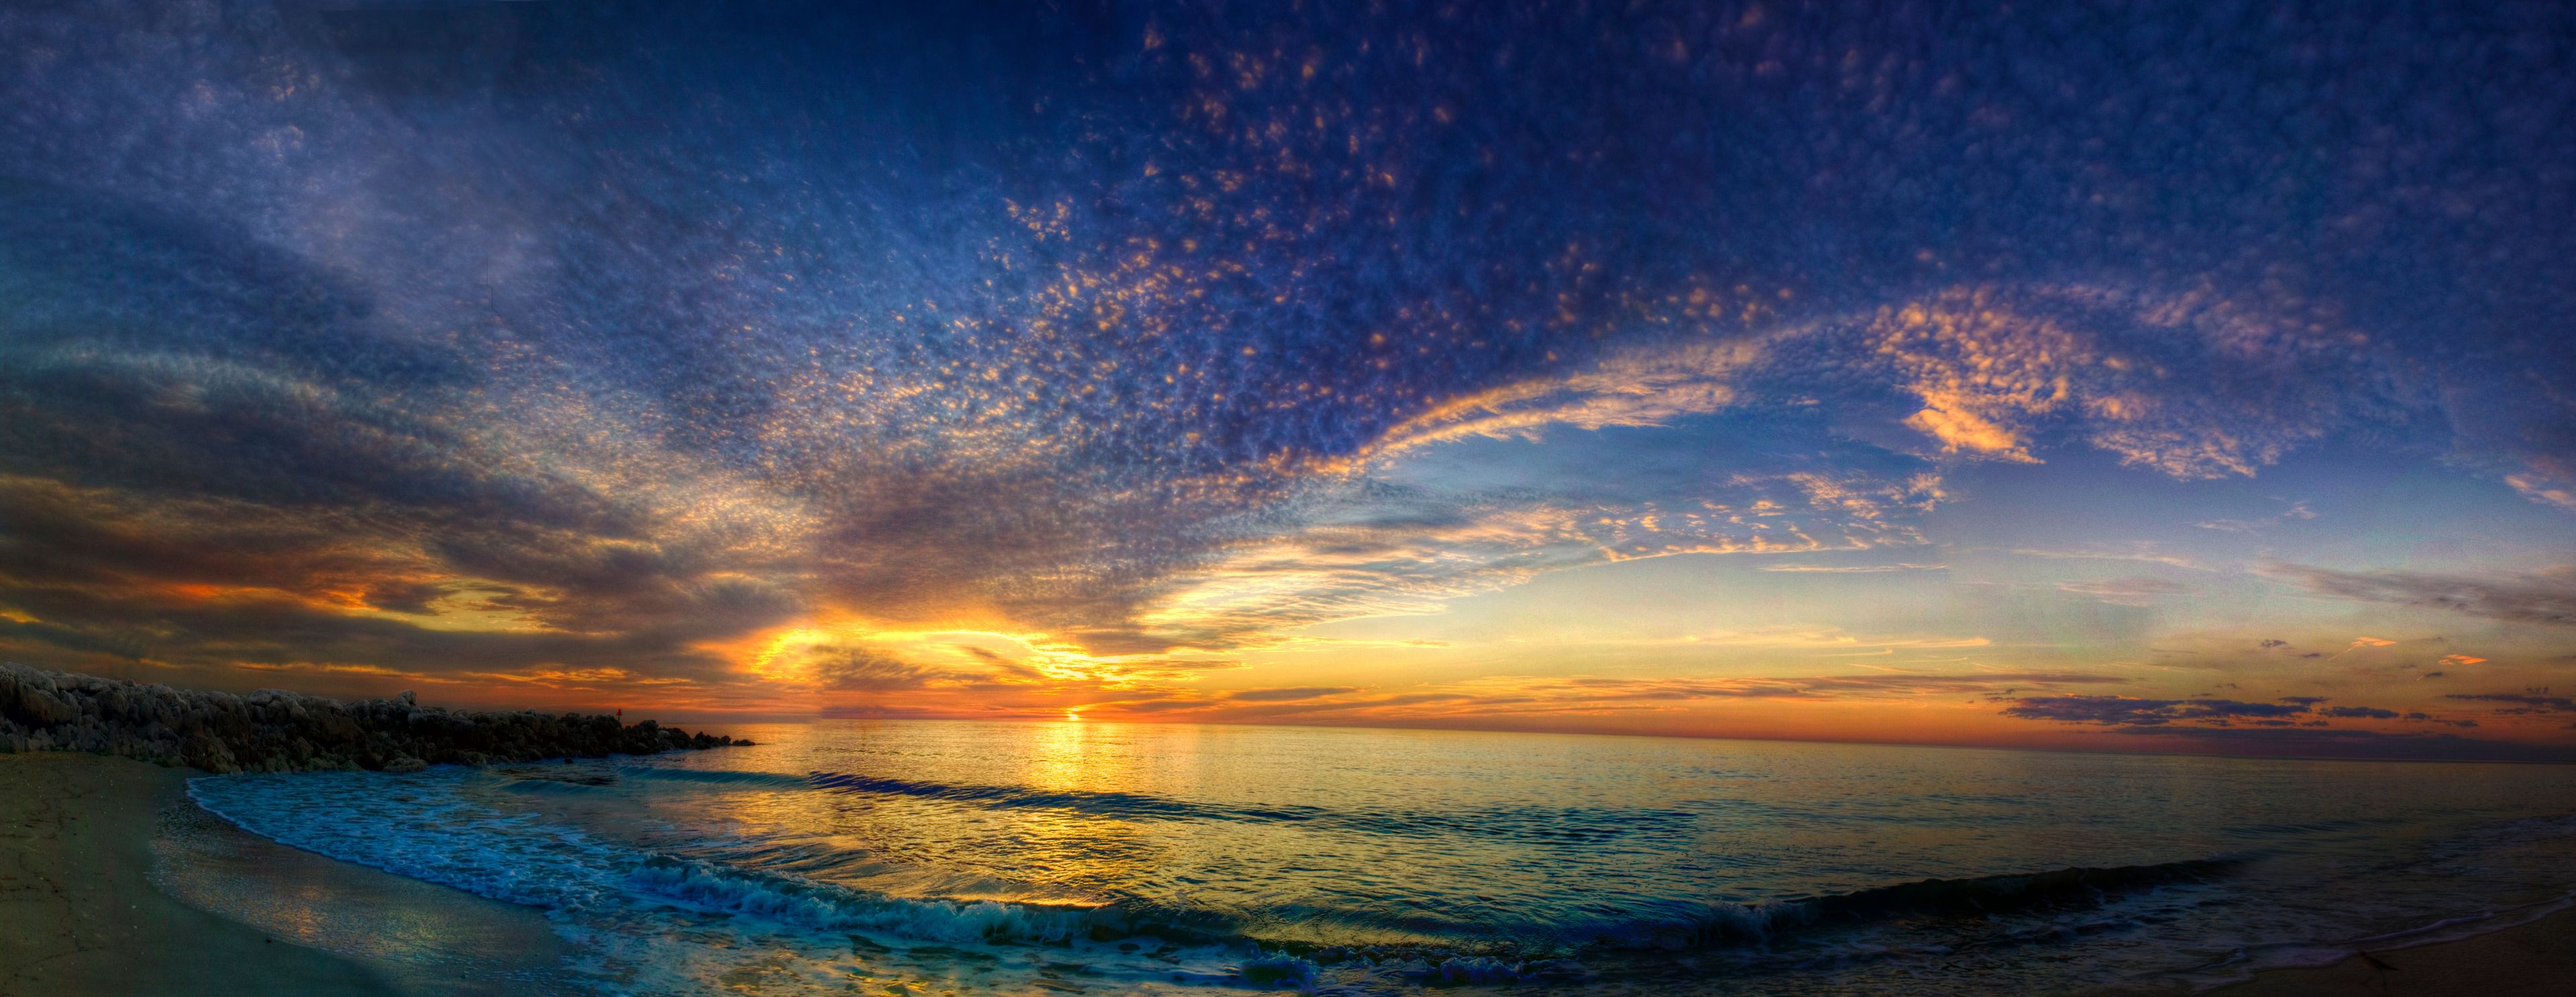 A panorama of the sun setting over the ocean.  